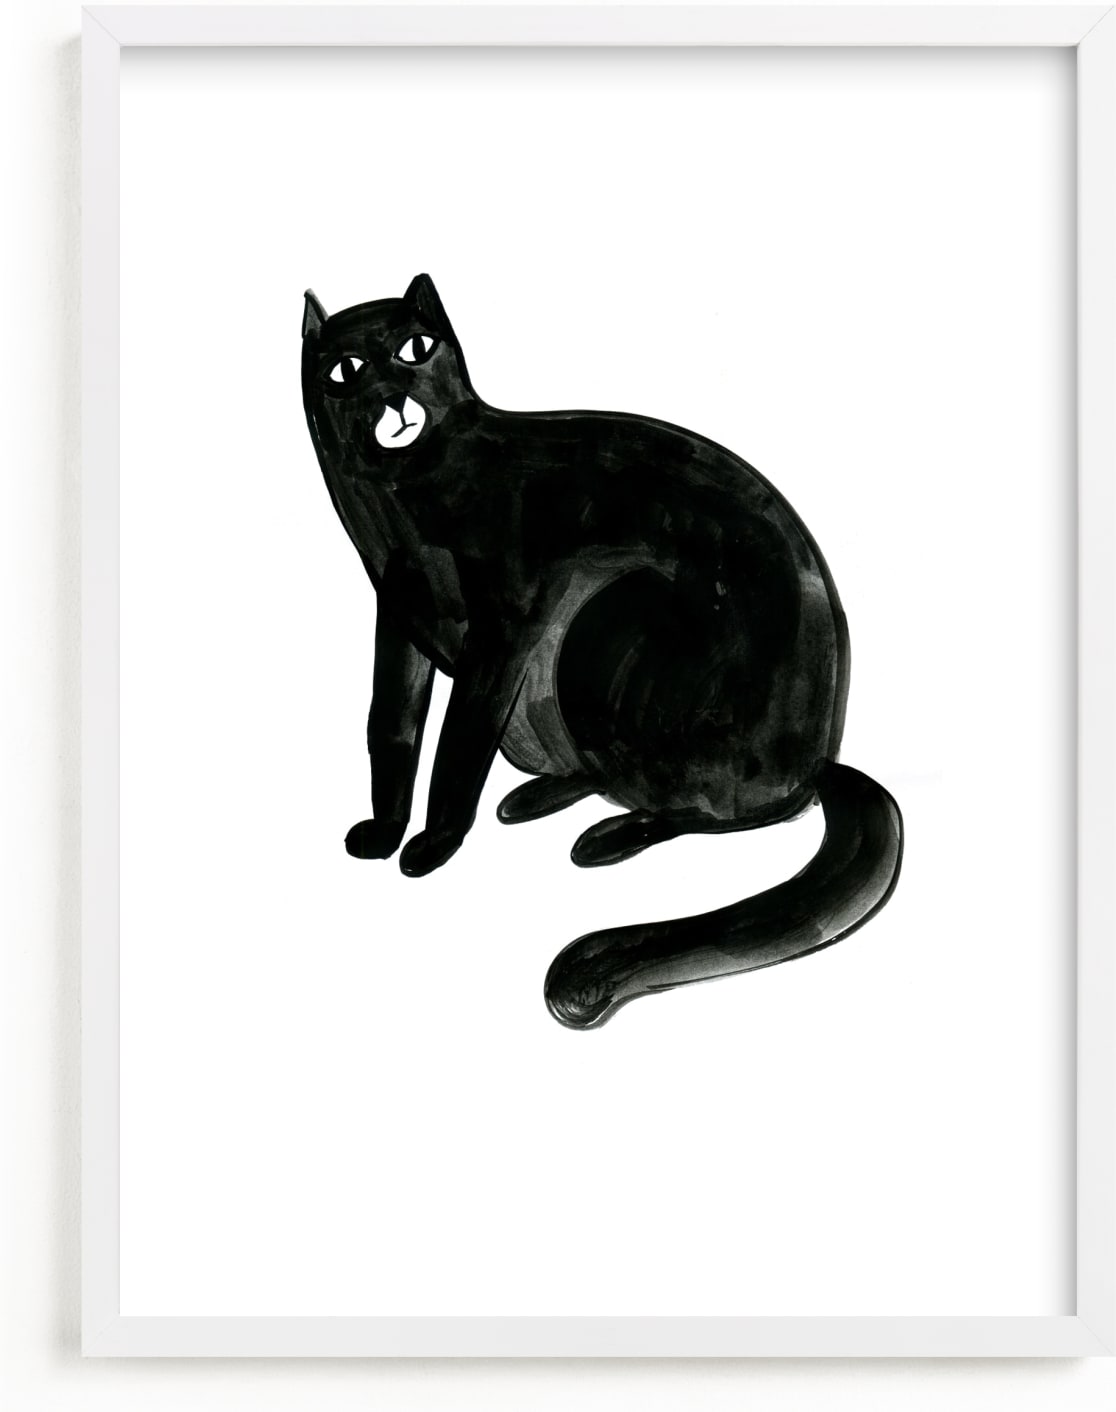 This is a black and white kids wall art by Alexandra Dzh called Graphic cat.